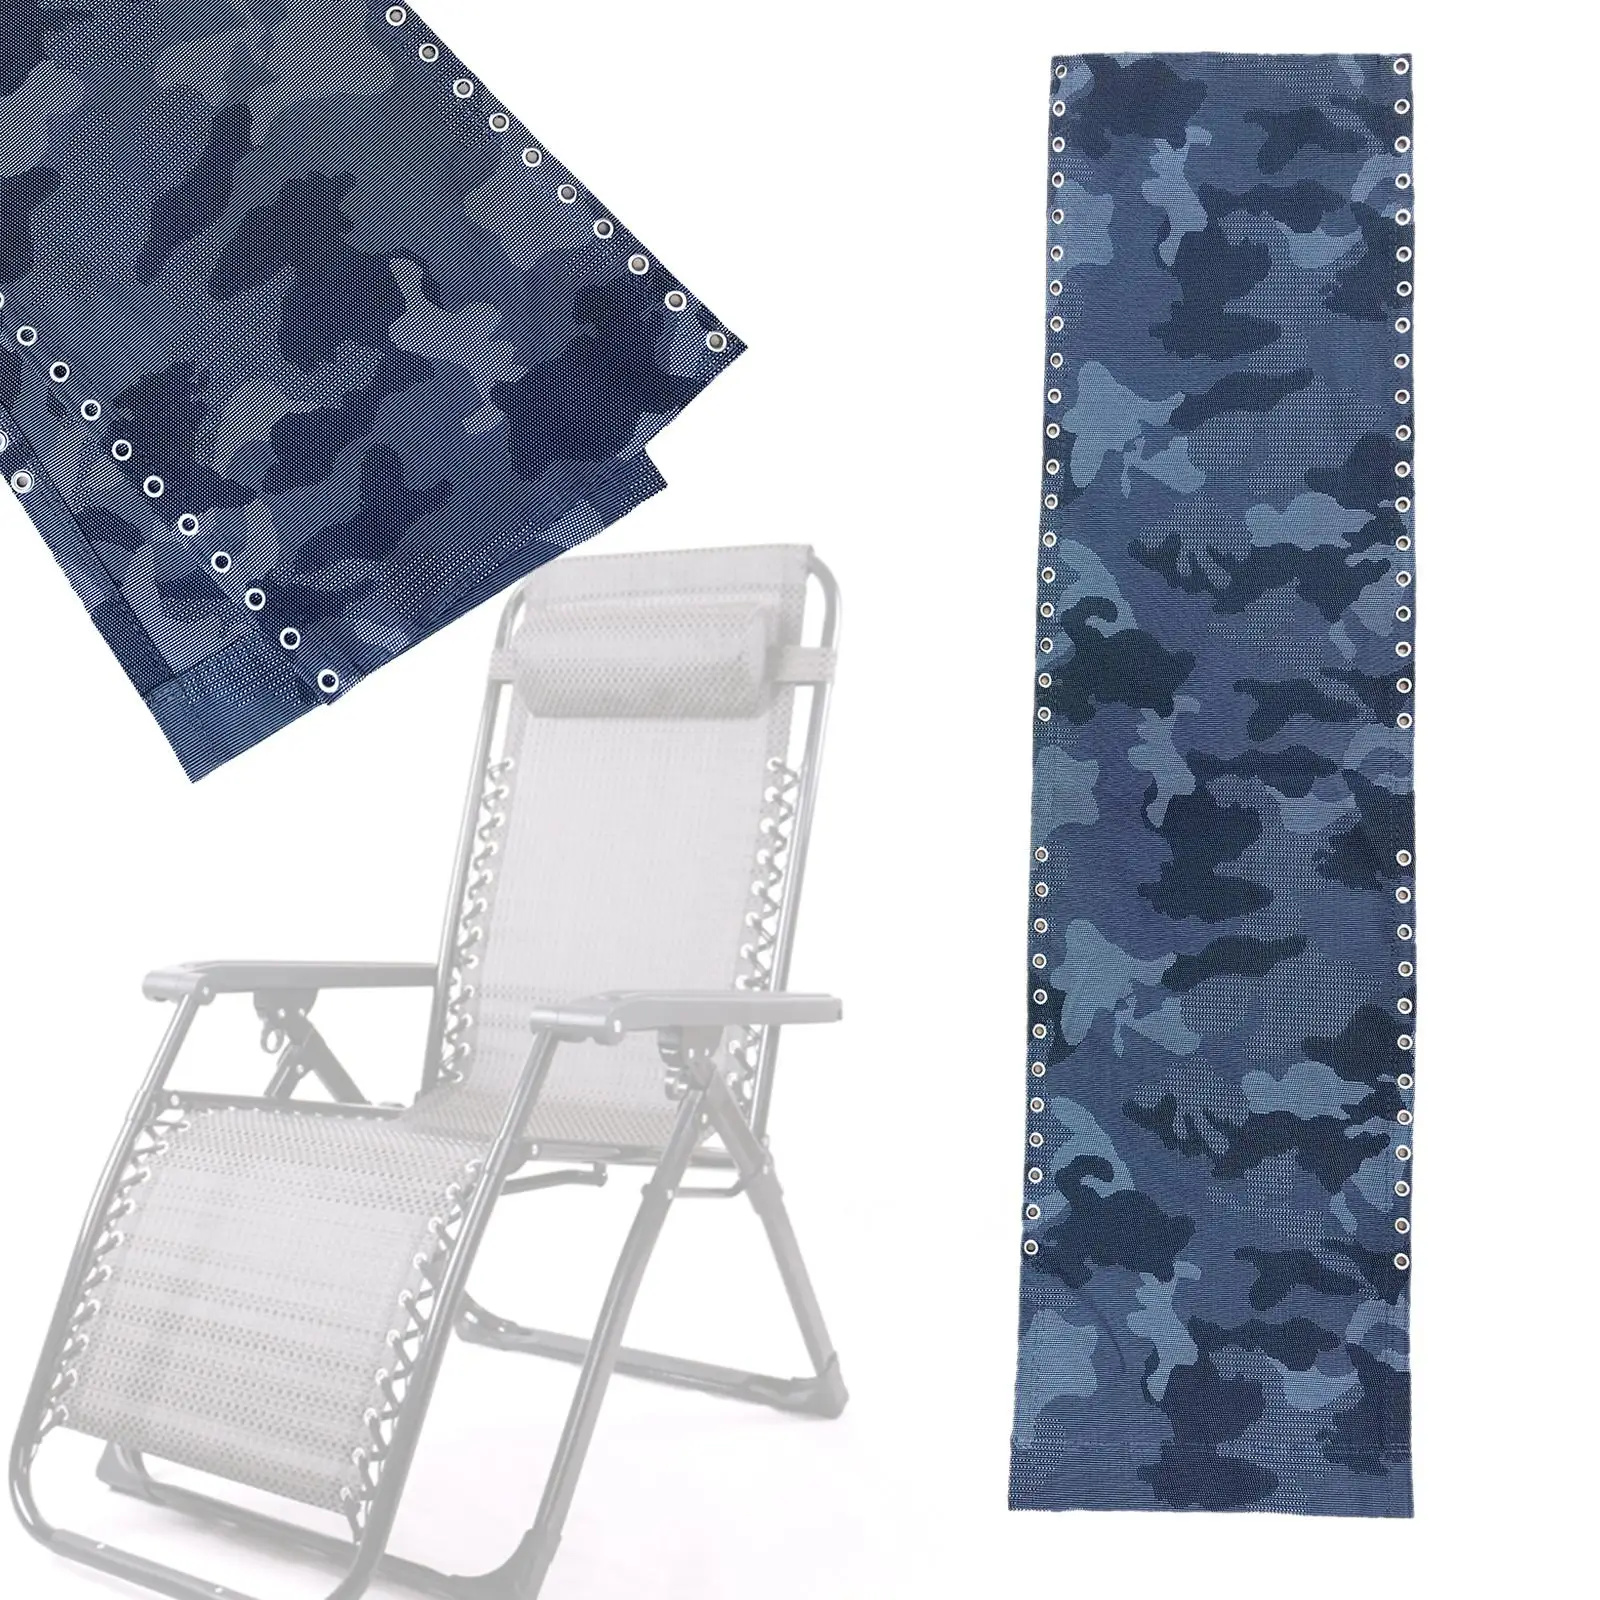 Recliner Cloth Chair Replacement Fabric, Lounge Chair Cloth for Patio Garden Recliners